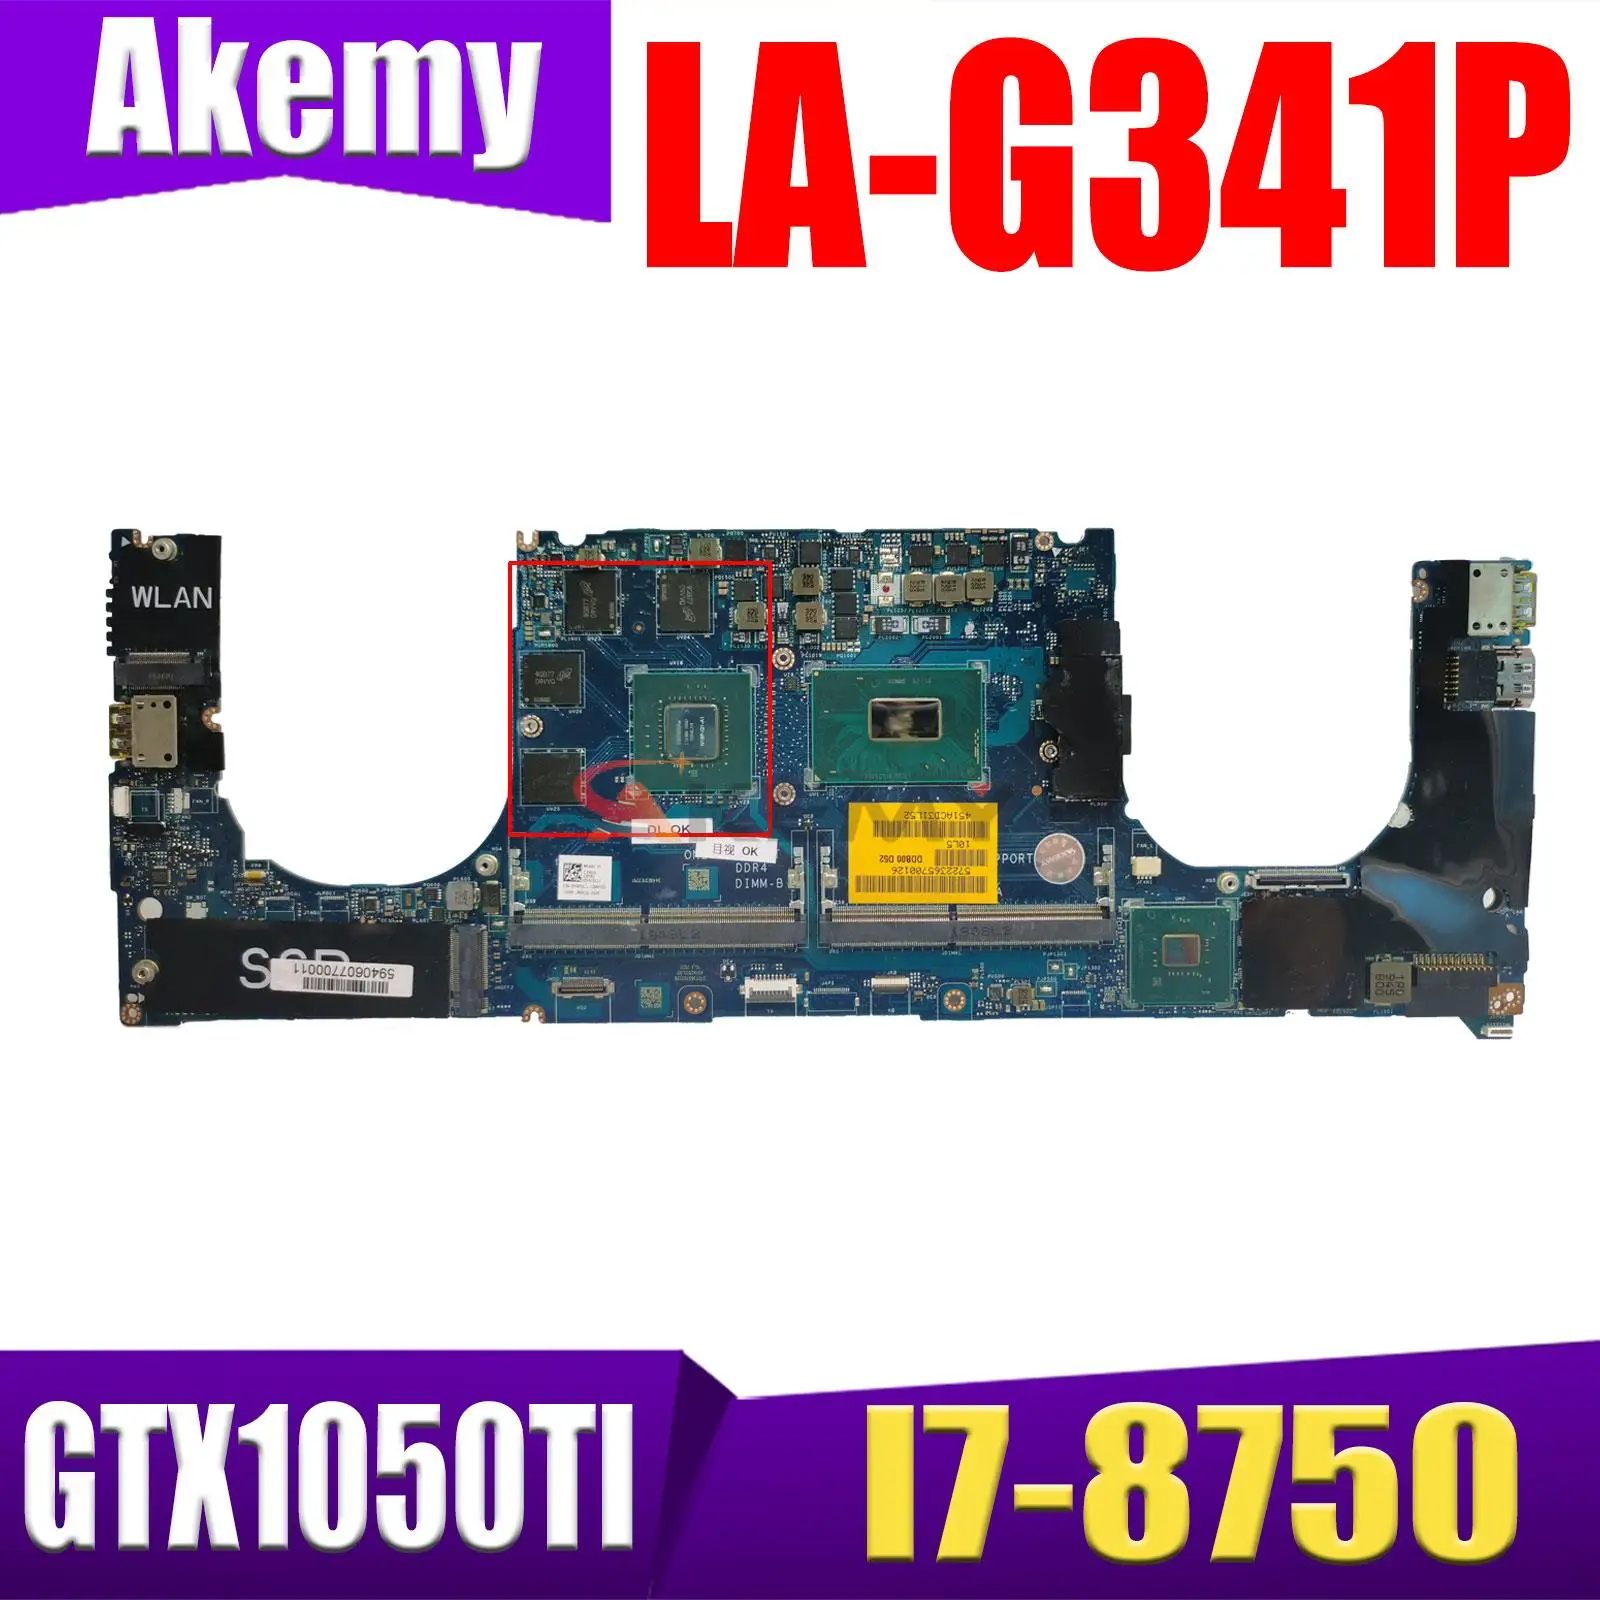 

Exchange! LA-G341P I7-8750 CPU GTX1050TI Mainboard For Dell XPS 15 9570 Laptop Motherboard CN-0F3DC8 F3DC8 100% working well